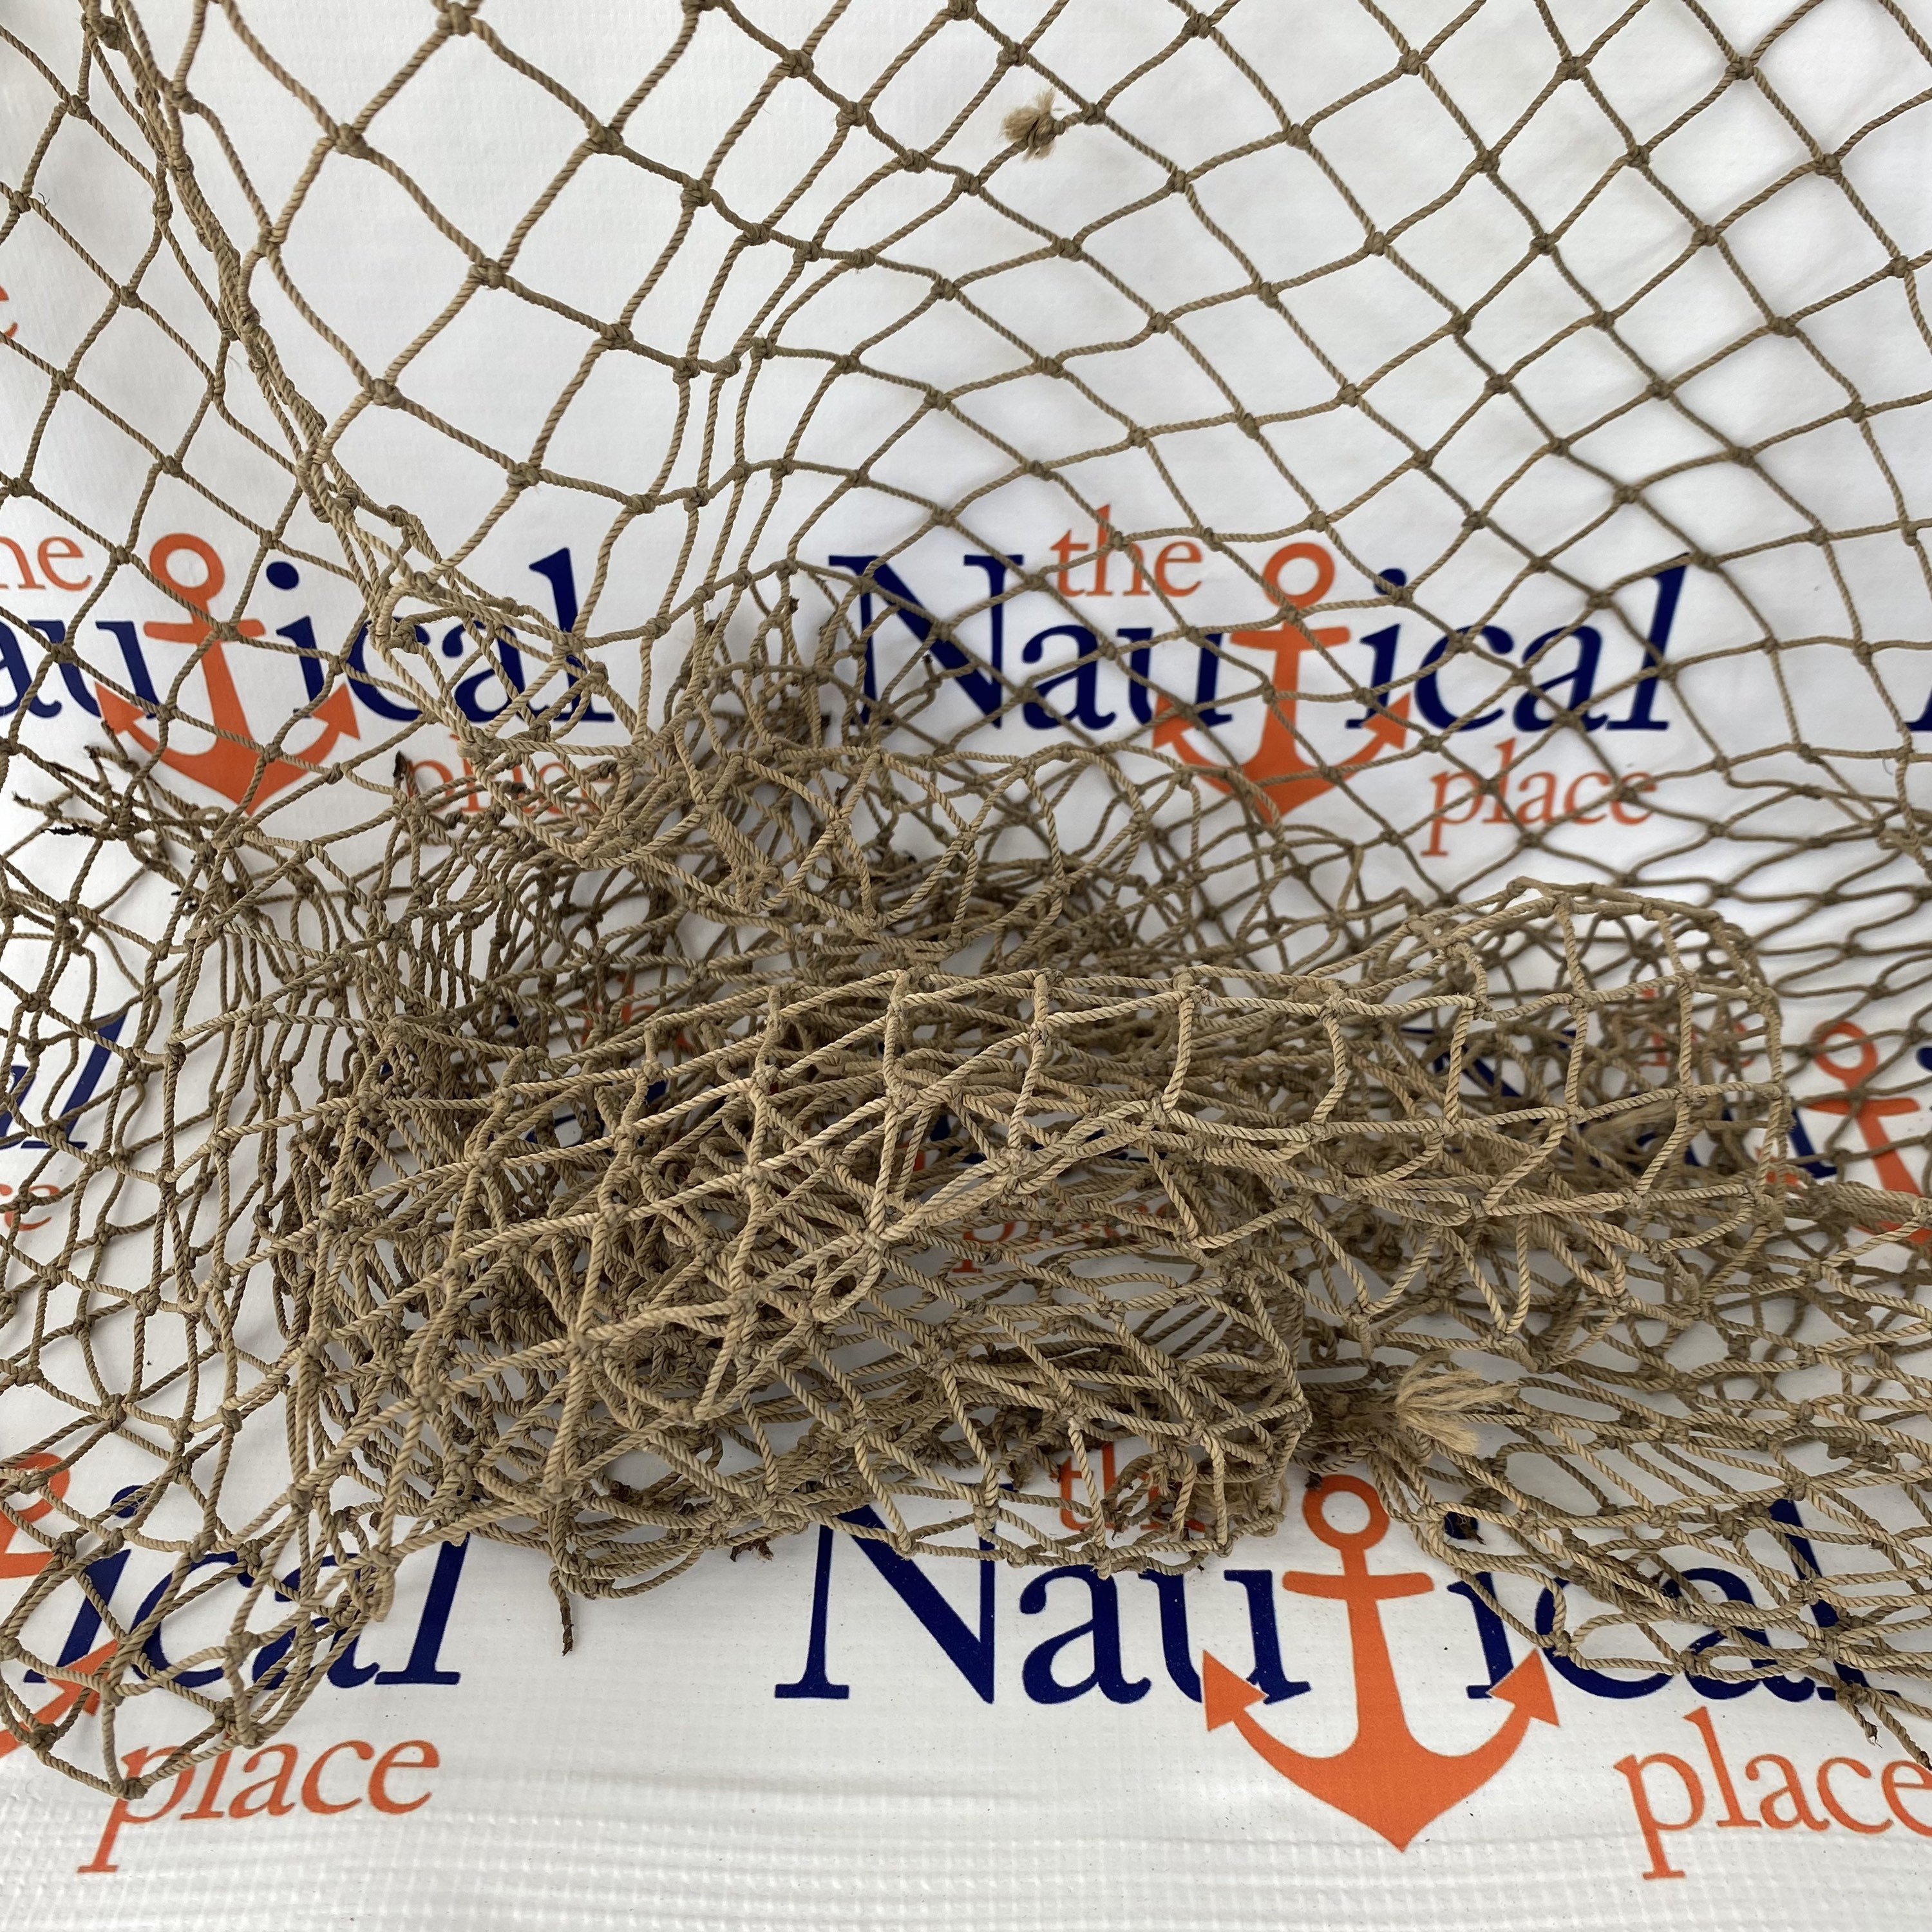 Old Used Fishing Net - 2 ft x 2 ft Knotted - Vintage Fish Netting -  Nautical Maritime Beach Room Decor - Hermit Crab Climbing Hammock